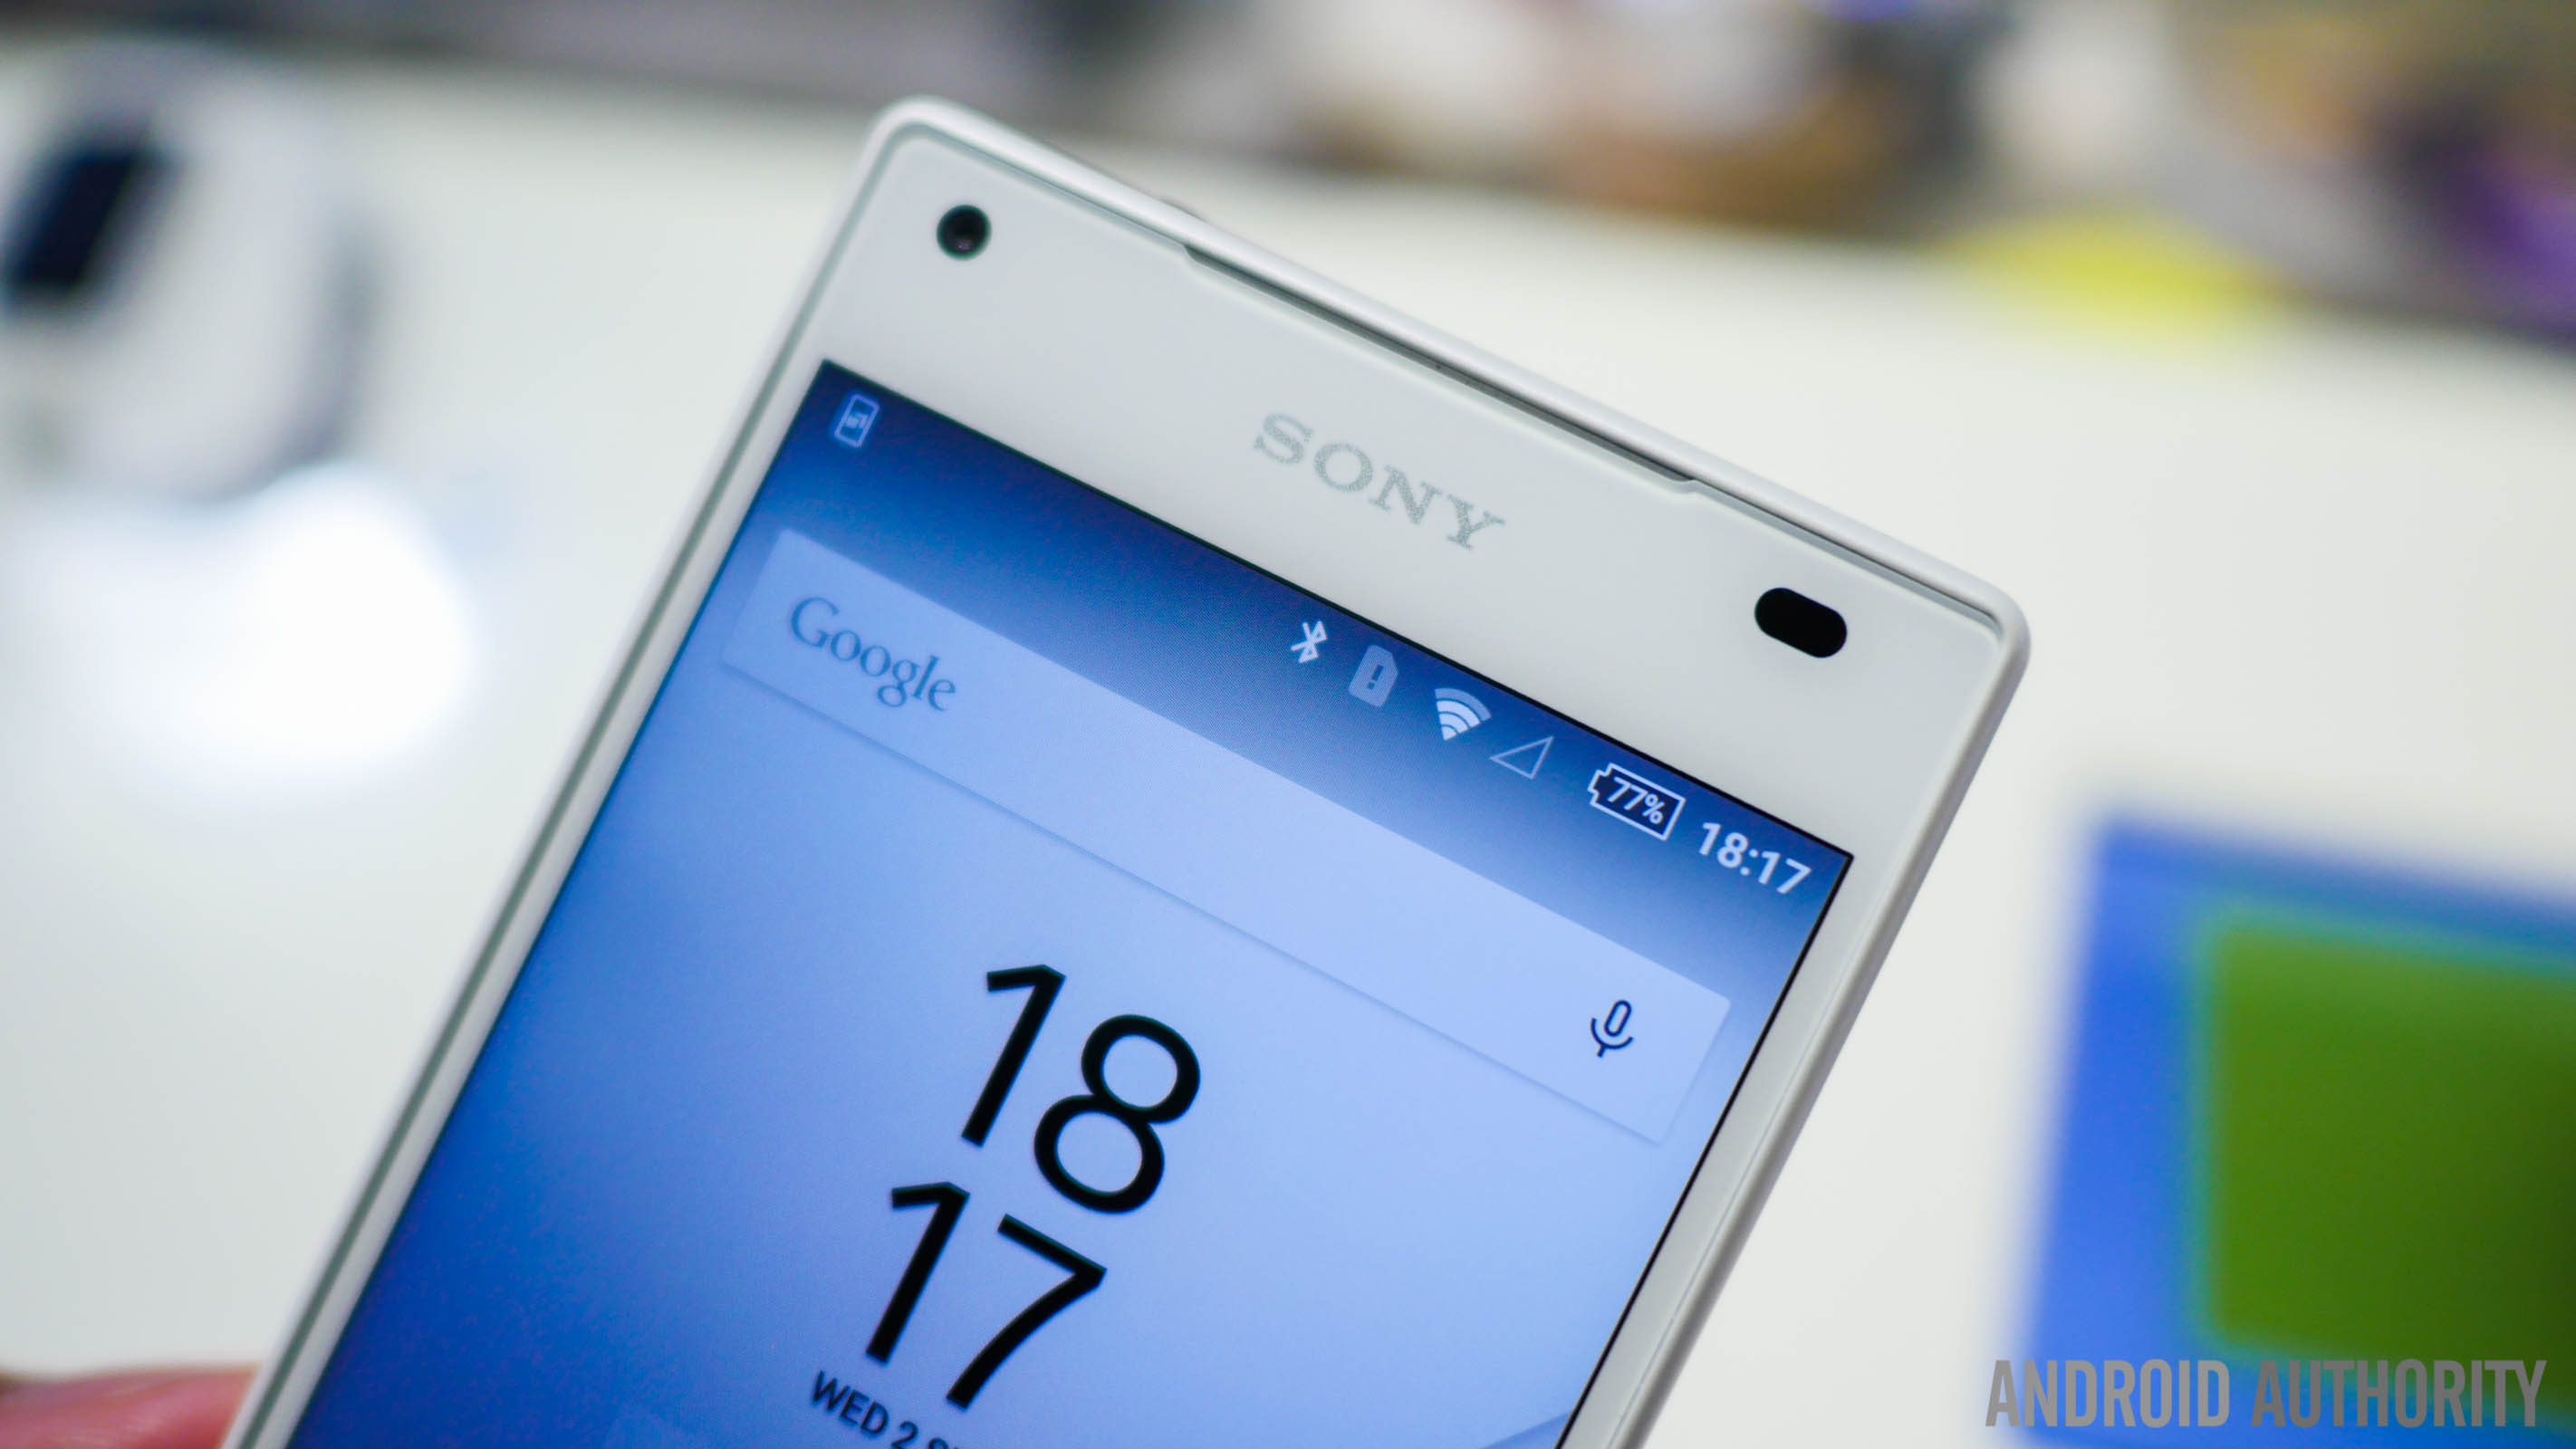 sony xperia z5 compact first look aa (7 of 12)